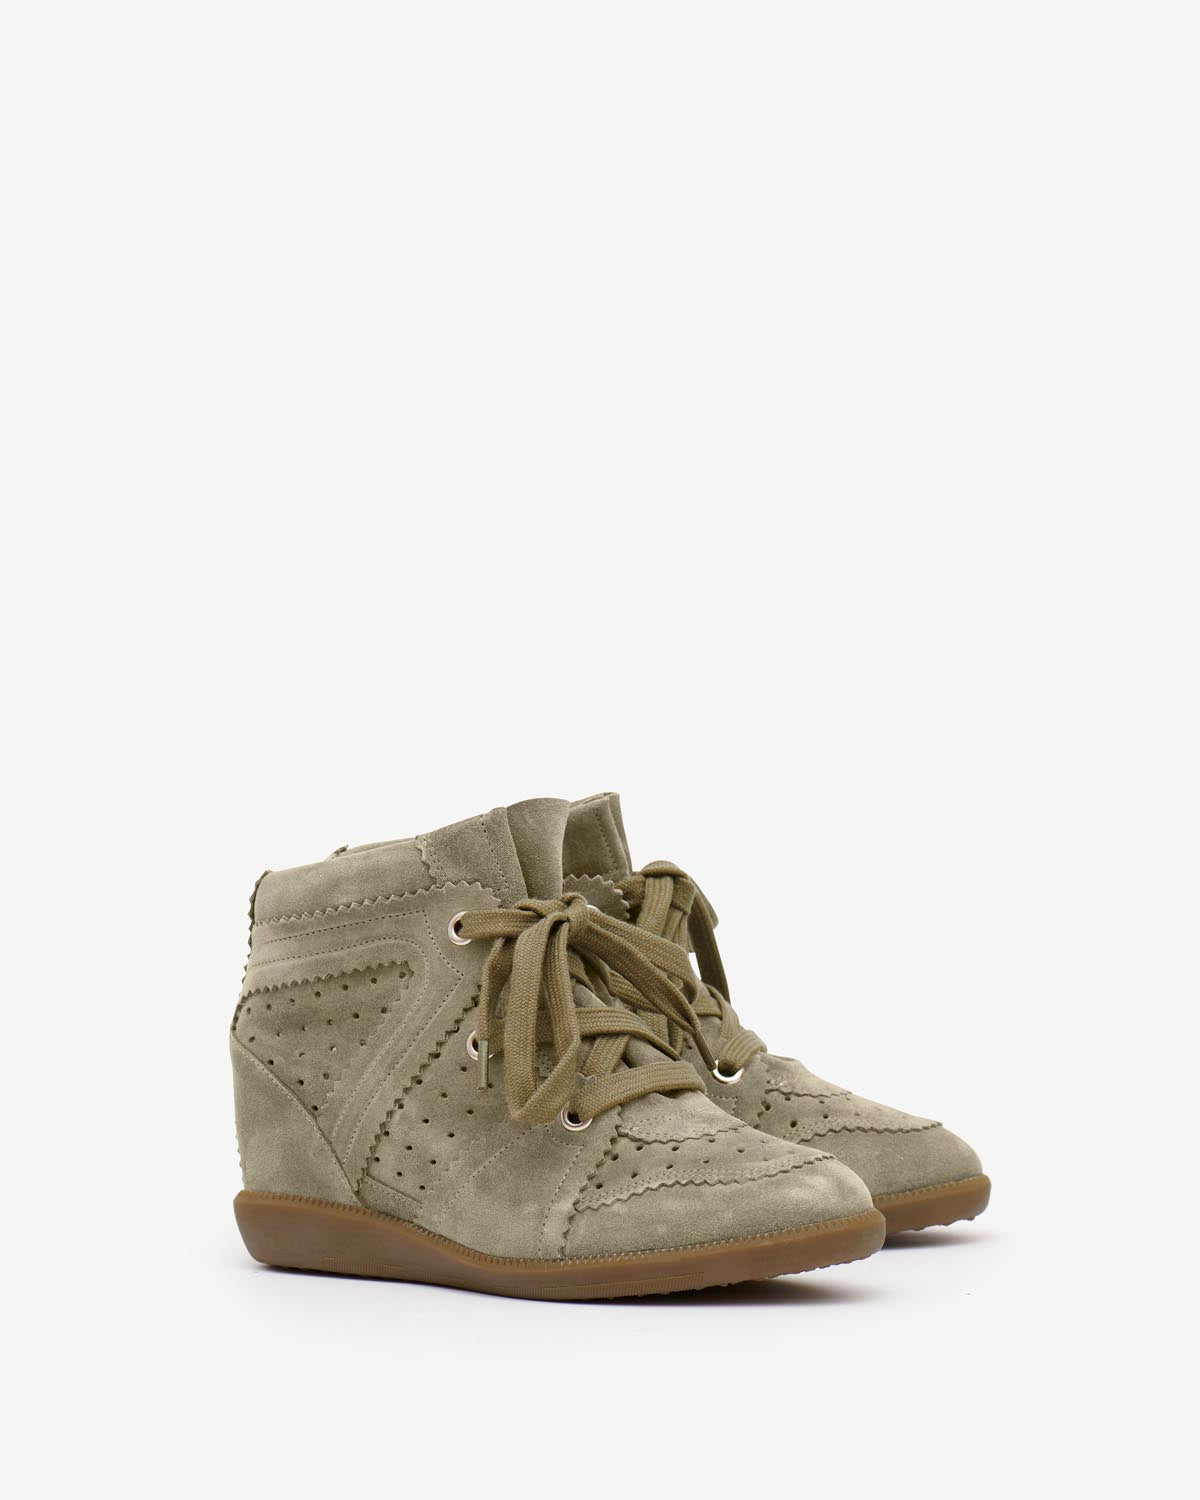 Sneakers bobby Woman Taupe 4